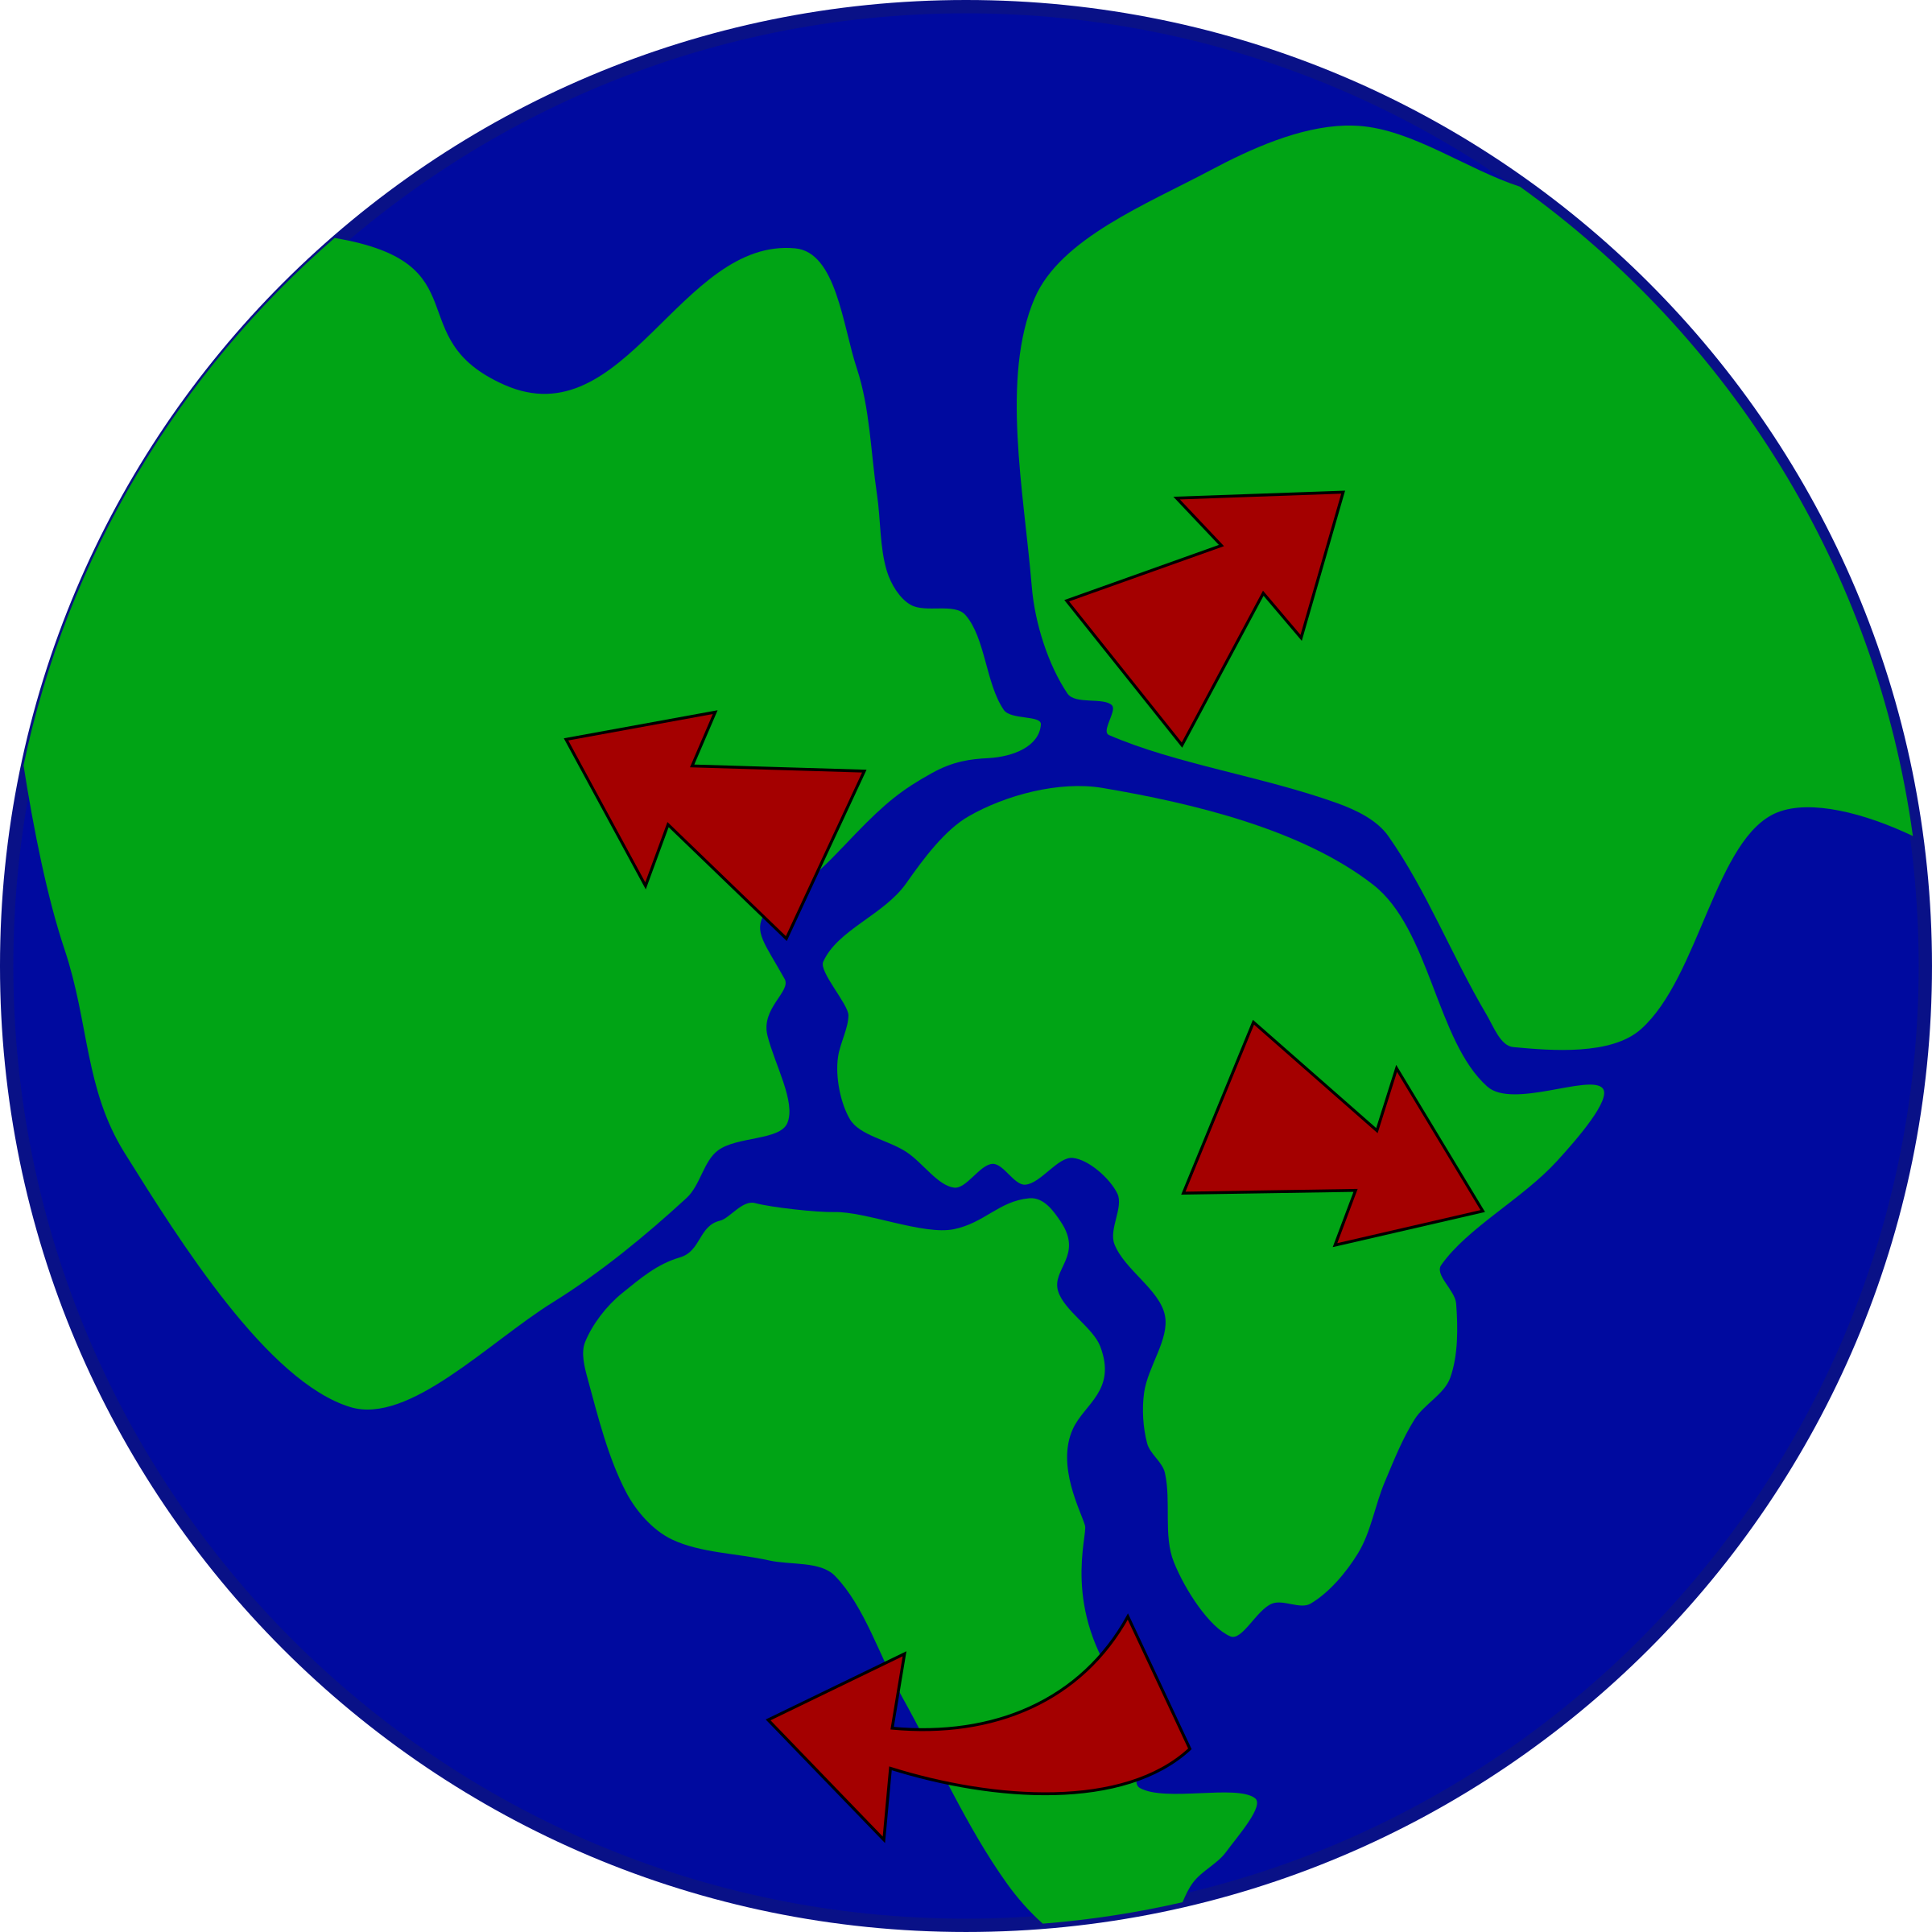 planet clipart geography